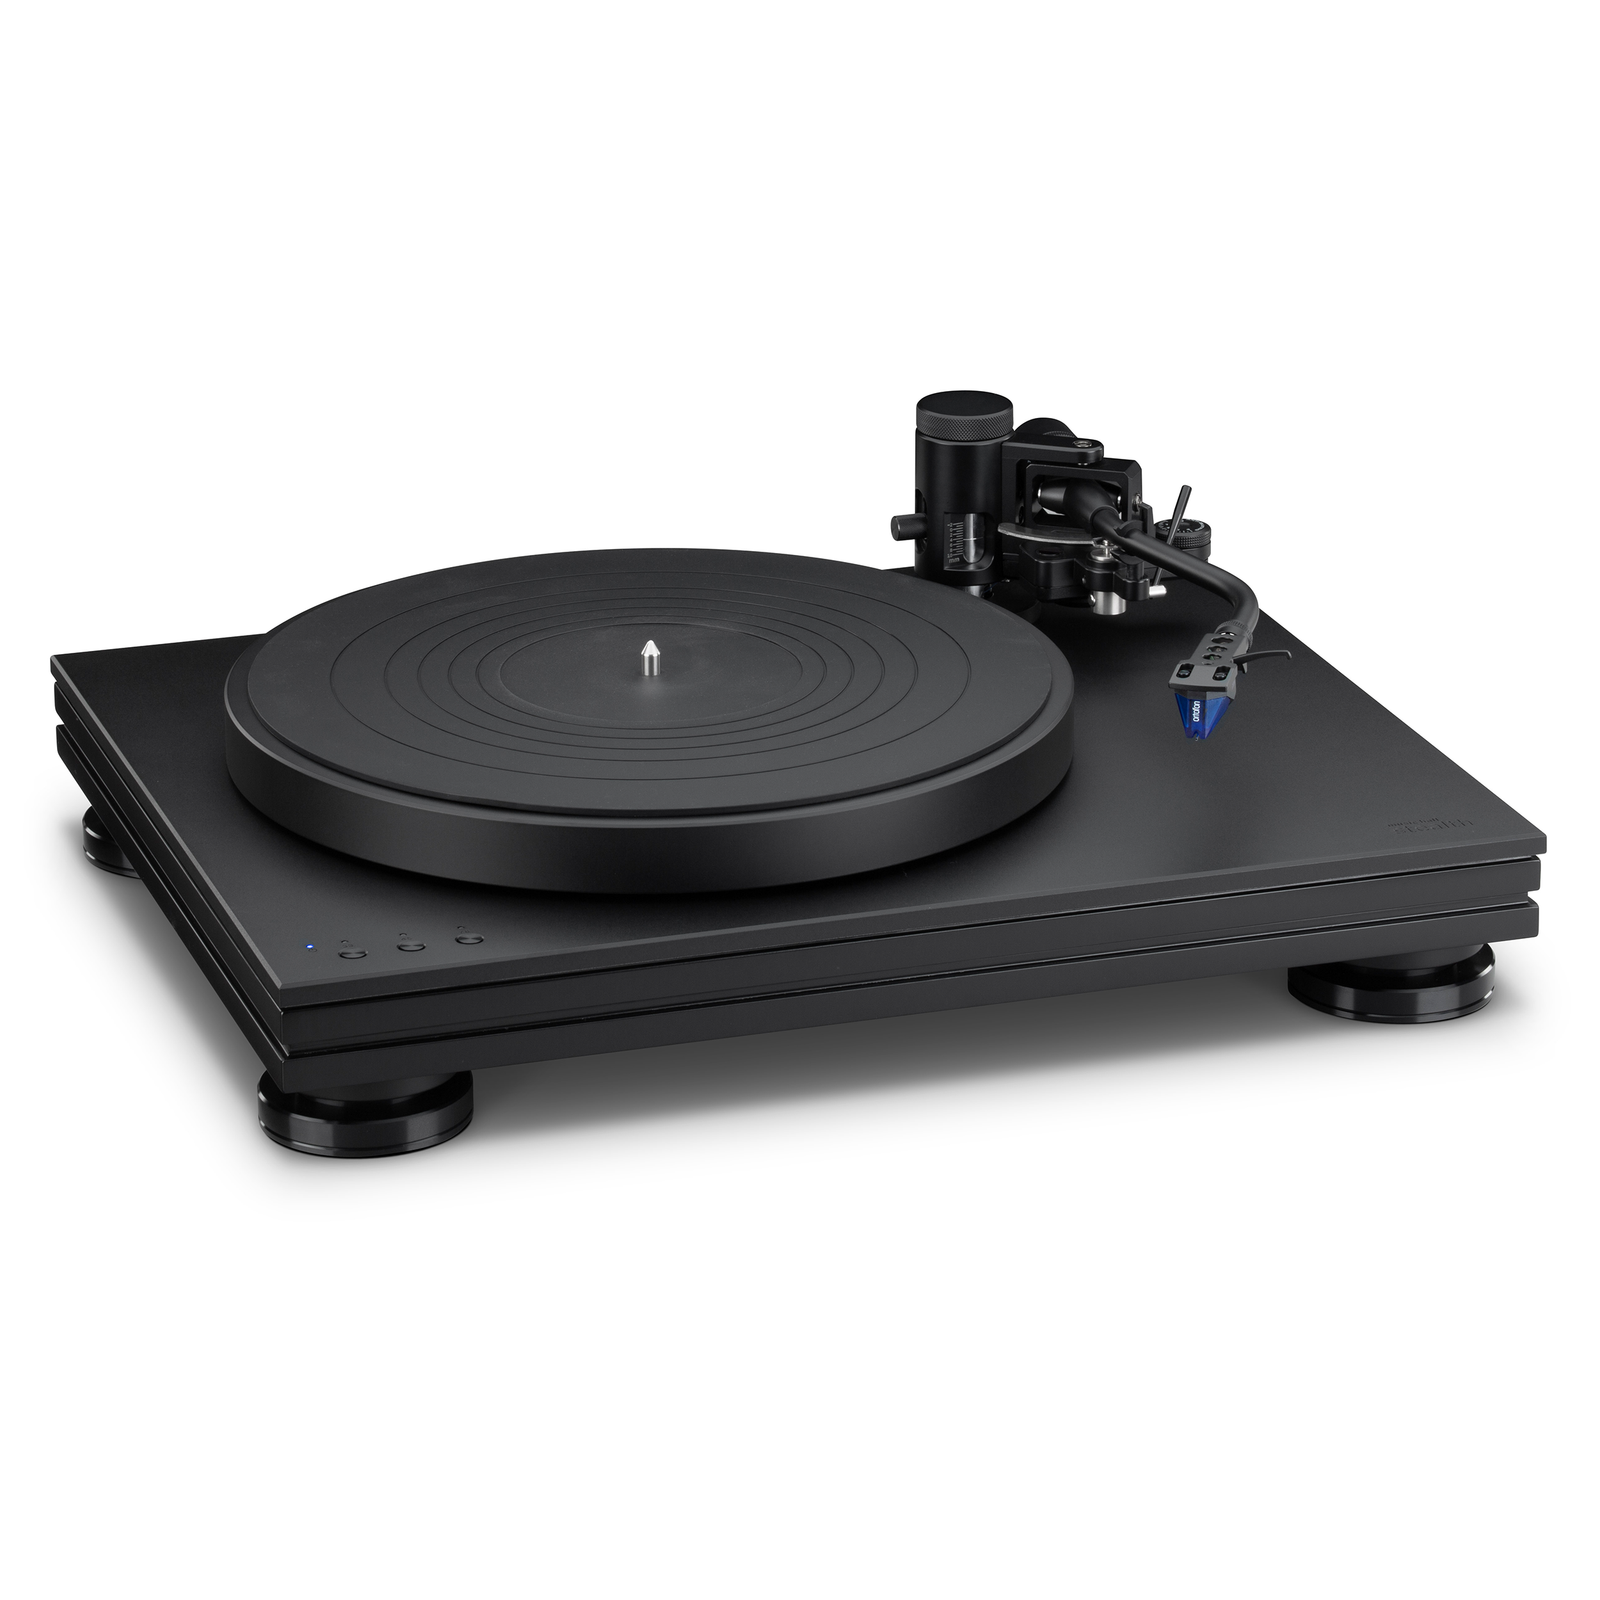 Product Highlights: 3-speed direct drive turntable with touch-activated speed controls Brushless, low-torque motor automatically stops running at the end of a record Heavy, multi-layer chassis and height-adjustable feet attenuate external vibrations S-shaped tonearm with VTA adjustment and detachable headshell Factory-mounted, precision-aligned Ortofon 2M Blue cartridge